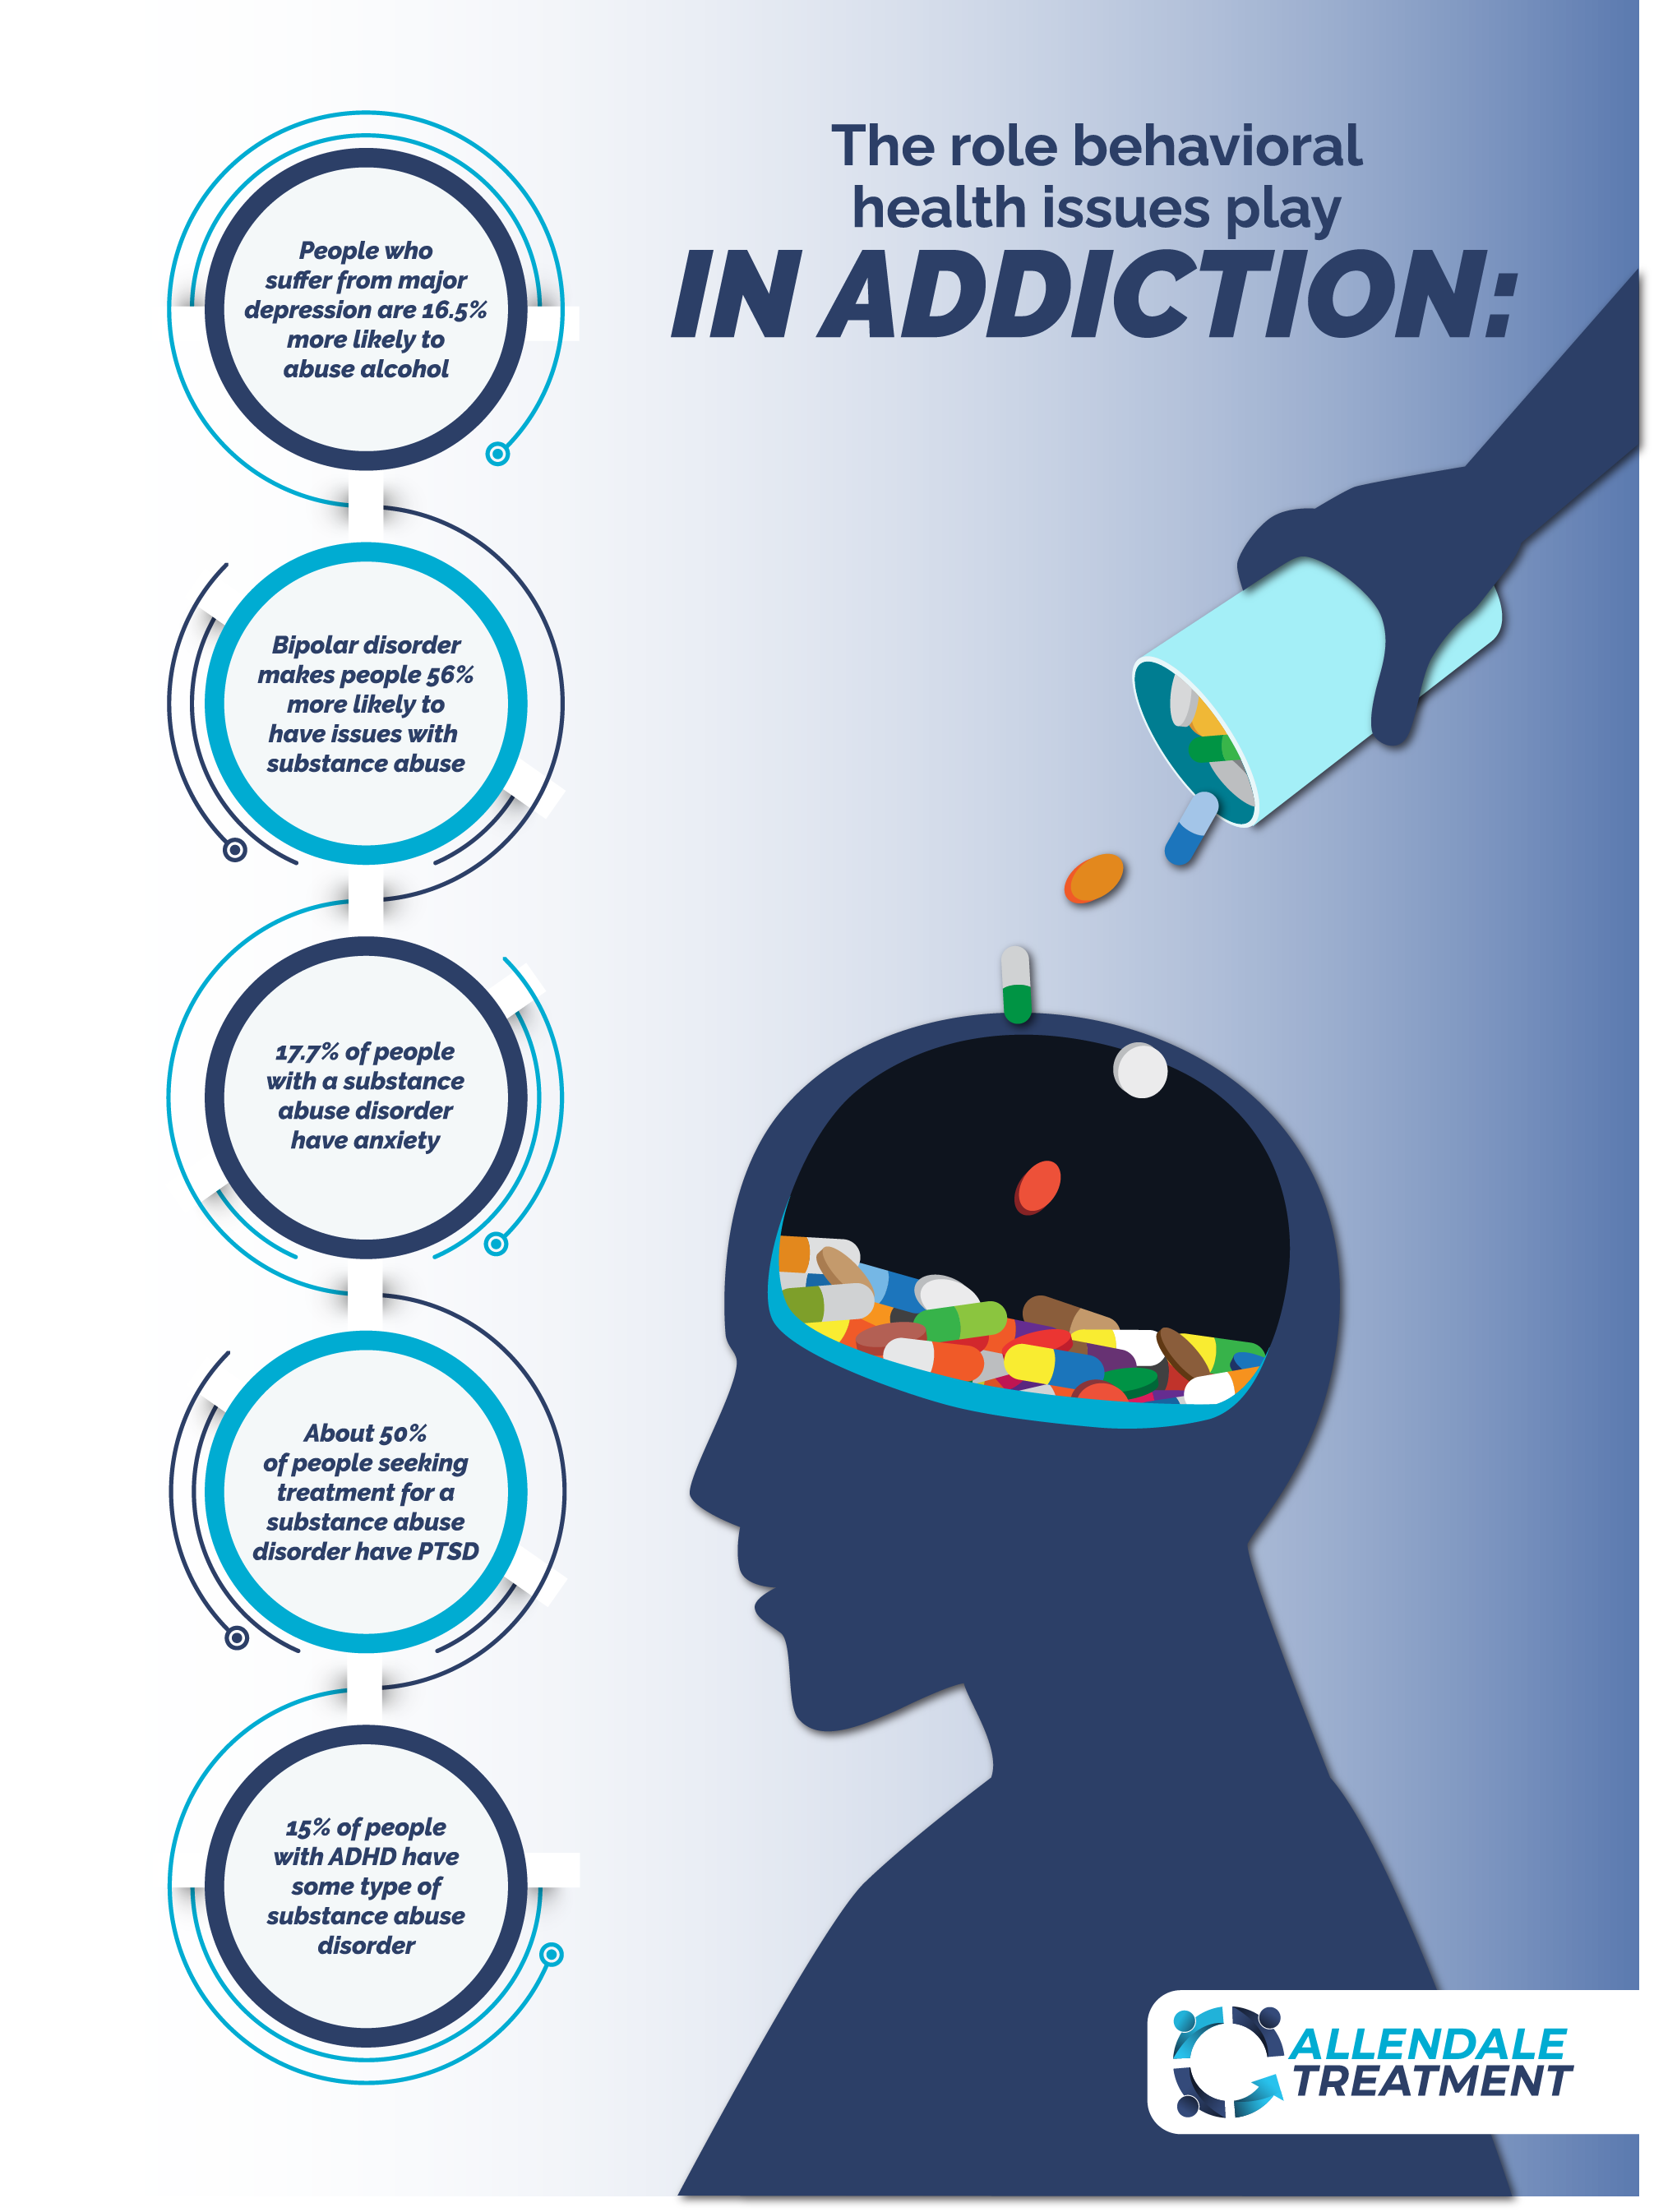 The Role Behavioral Health Issues Play in Addiction